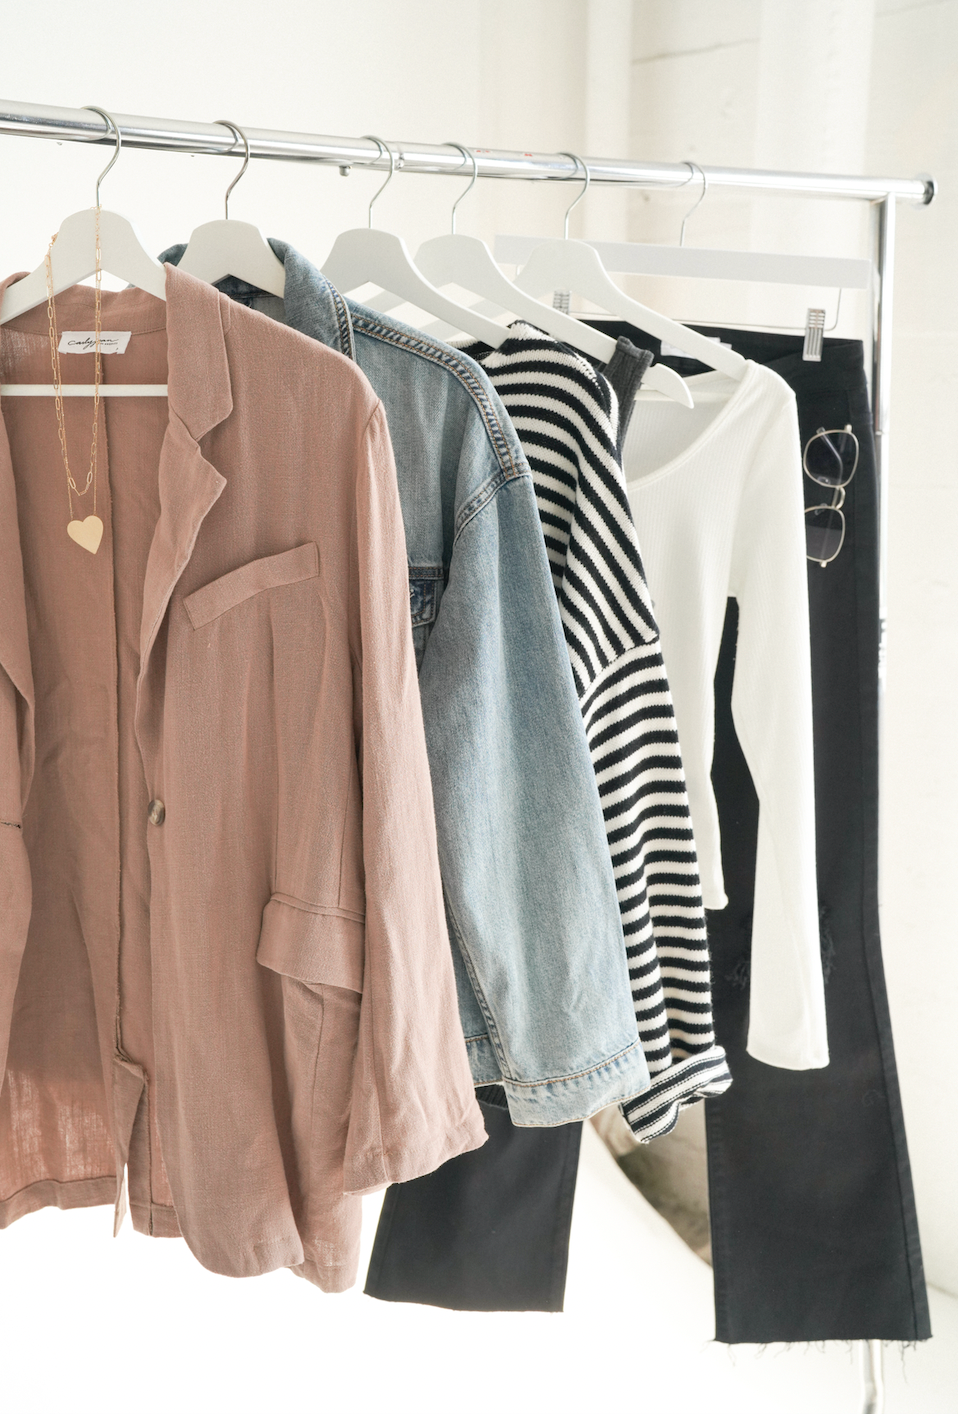 5 Steps to Refreshing Your Closet